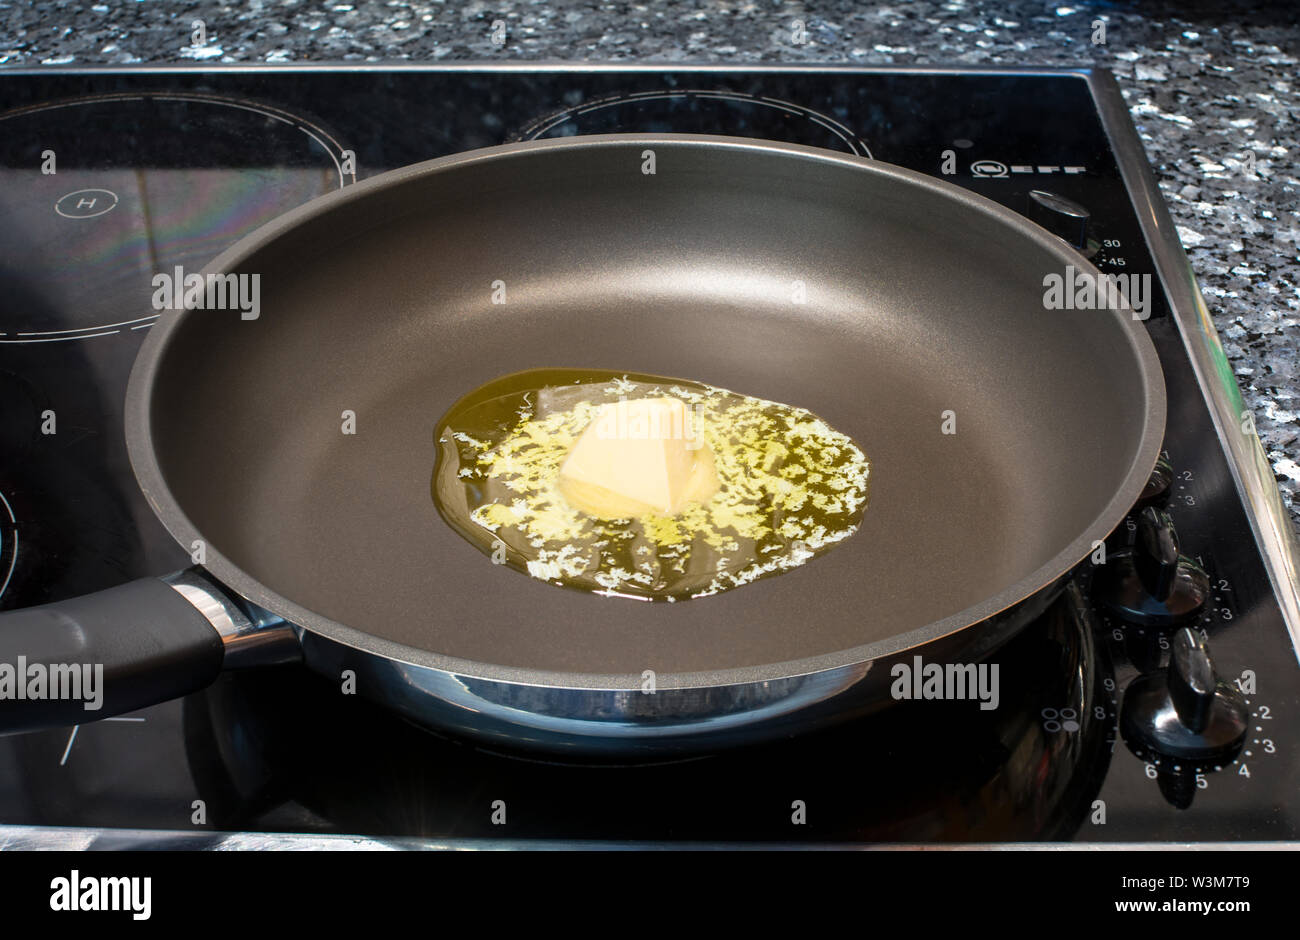 Knob of butter melting on a frying pan Stock Photo